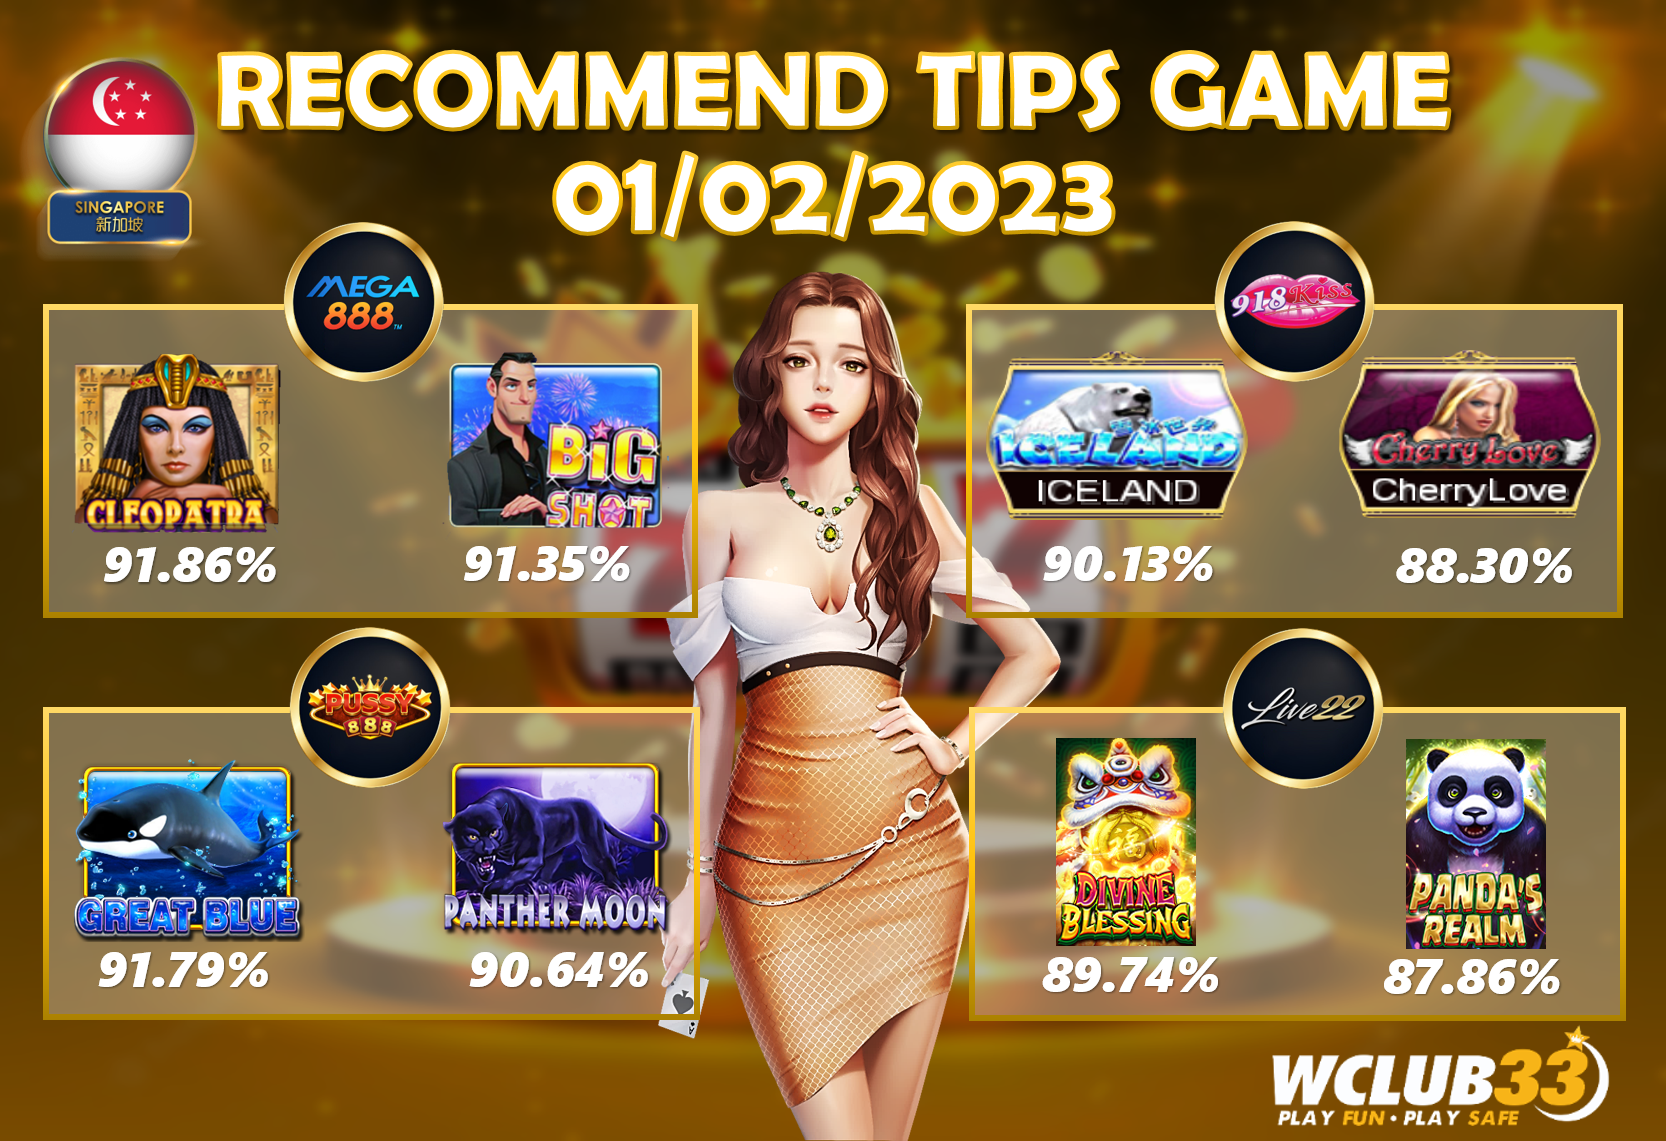 UPDATE TIPS GAME 01/02